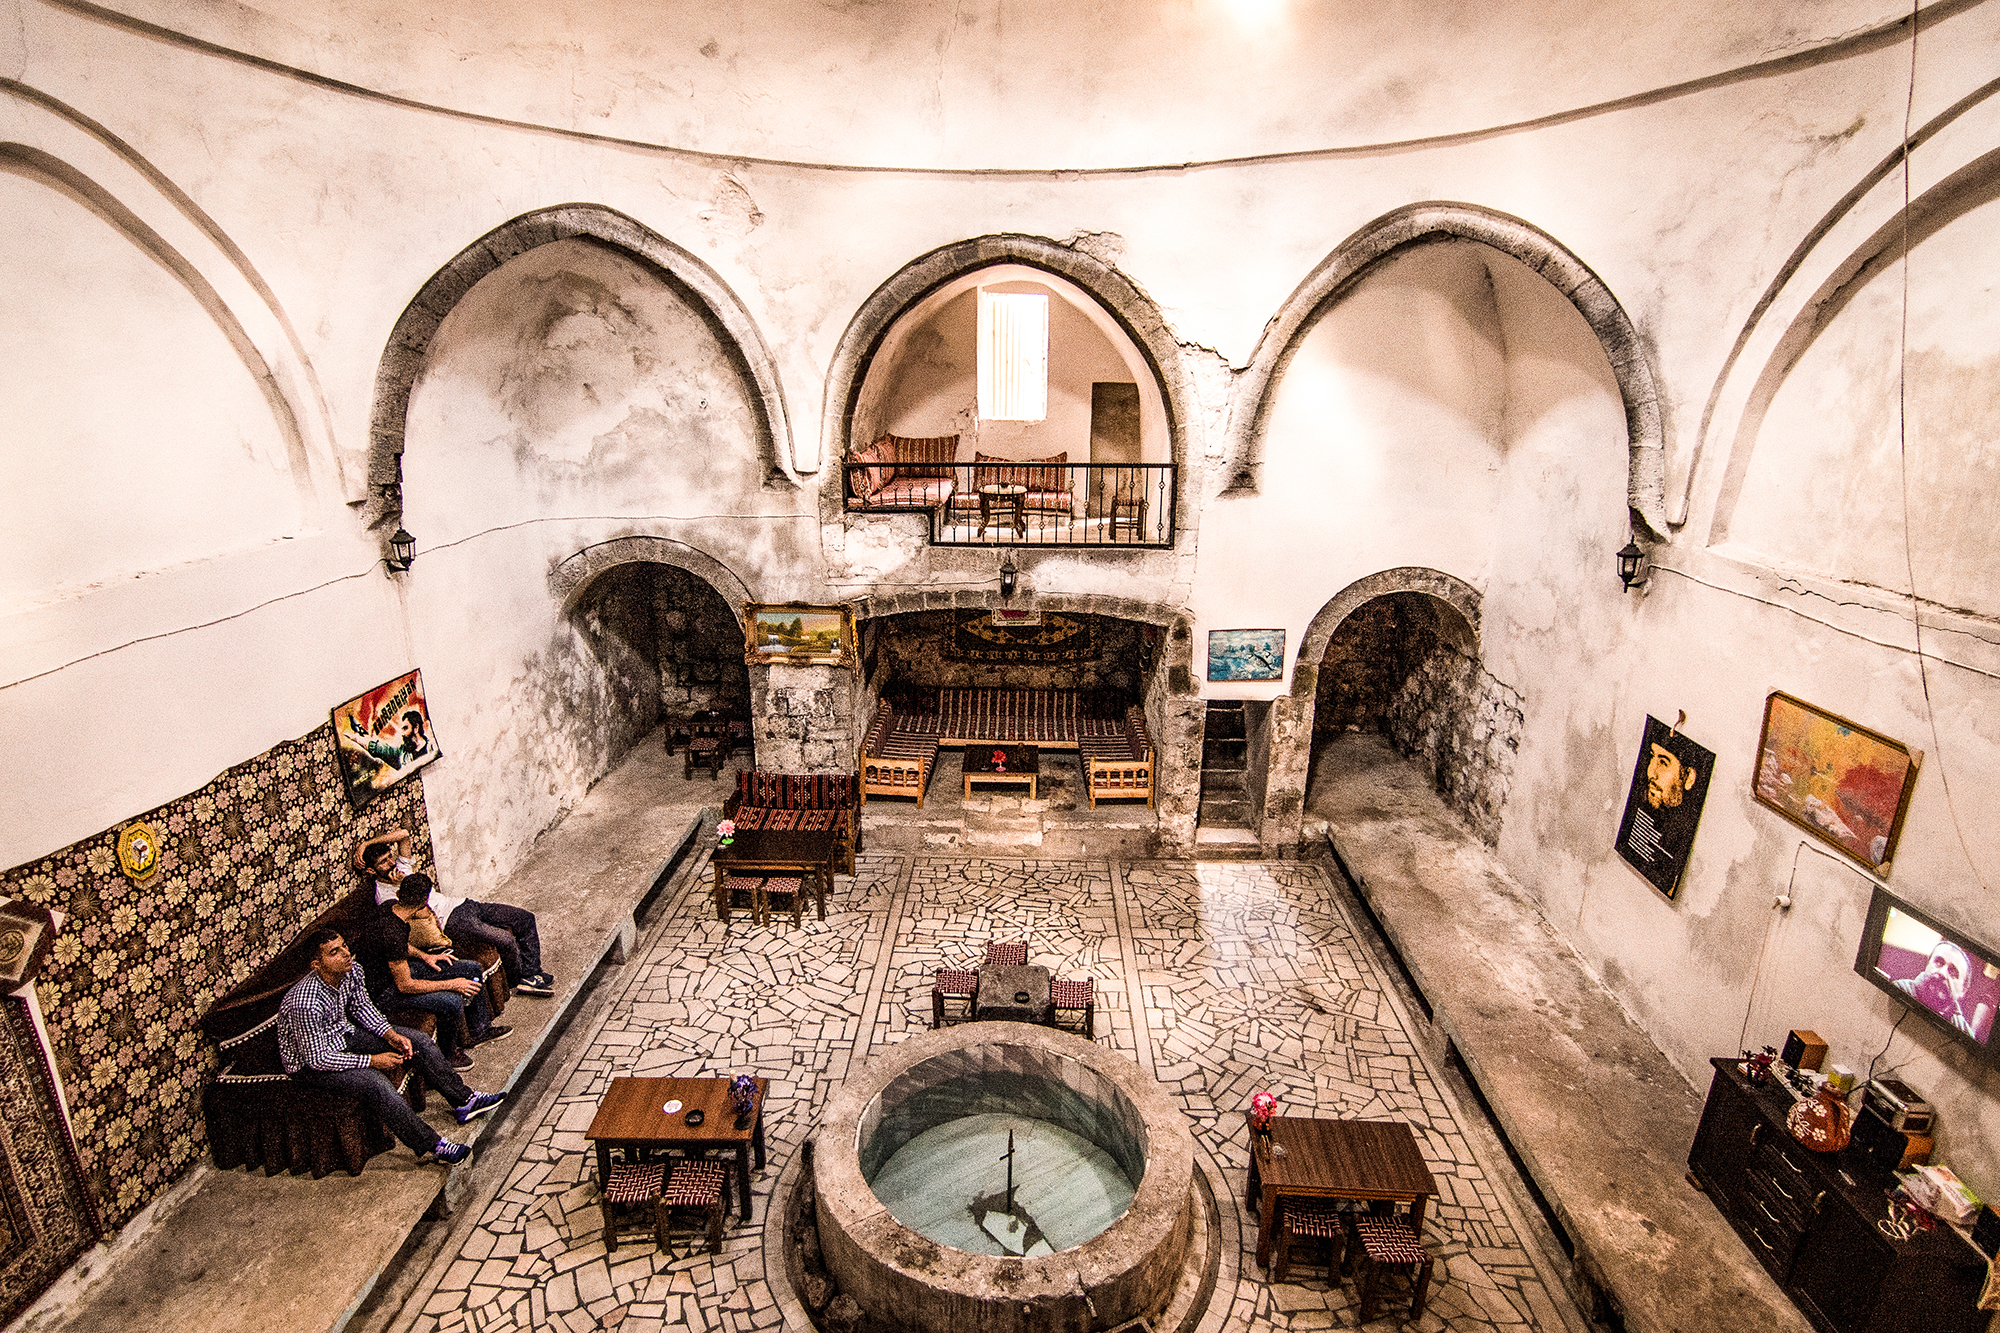 A Culture That Brings People Together And Heals The Baths Of Diyarbakir Diyarbakir S Memory